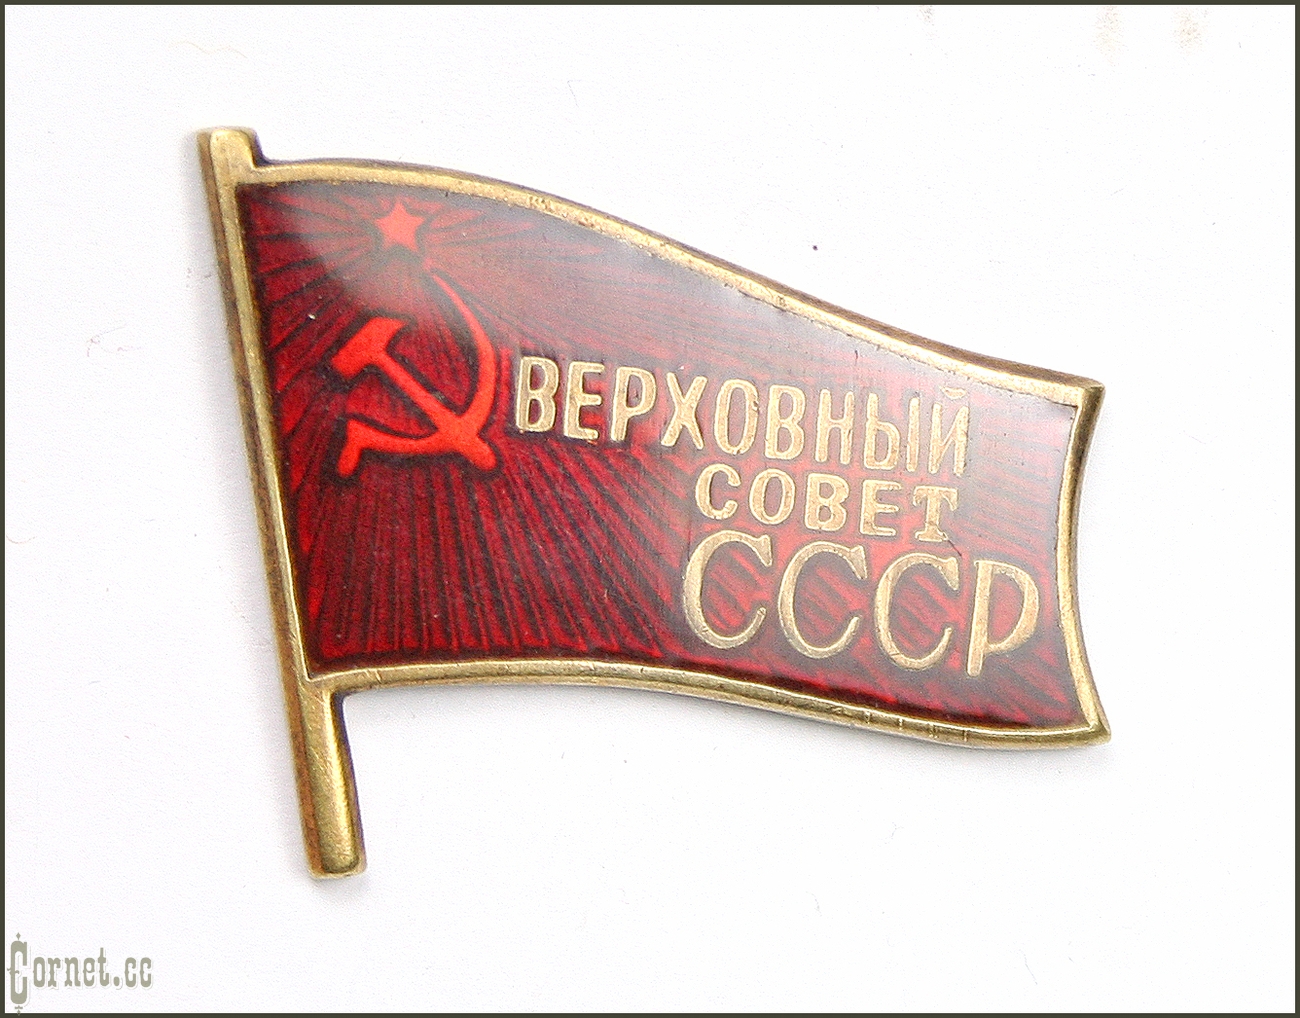 Sign of the deputy of the Supreme Soviet of the USSR